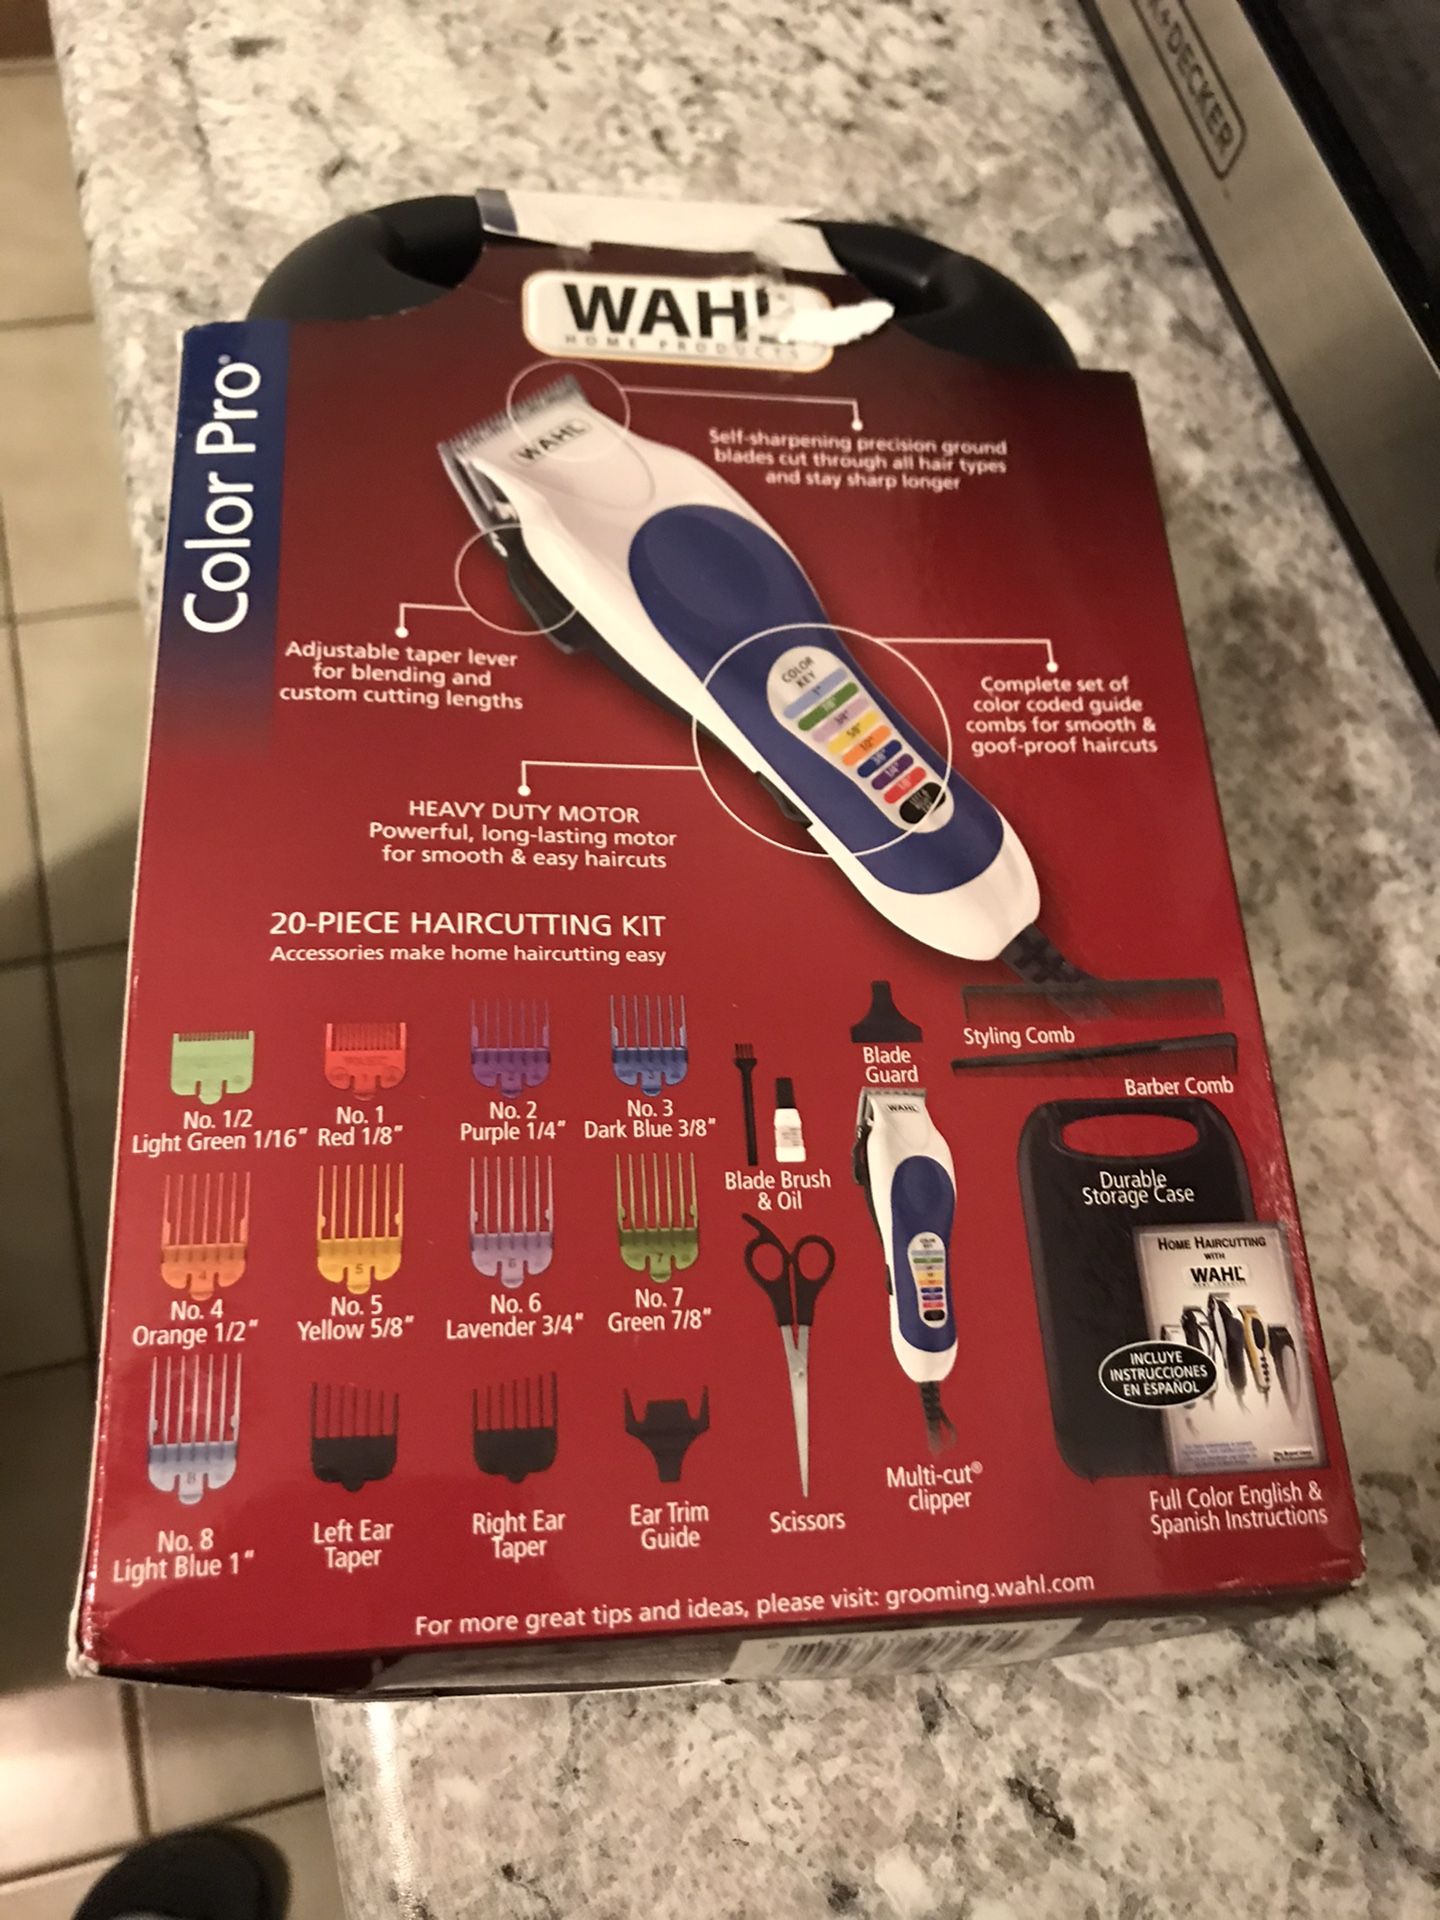 New WAHL color pro haircutting kit